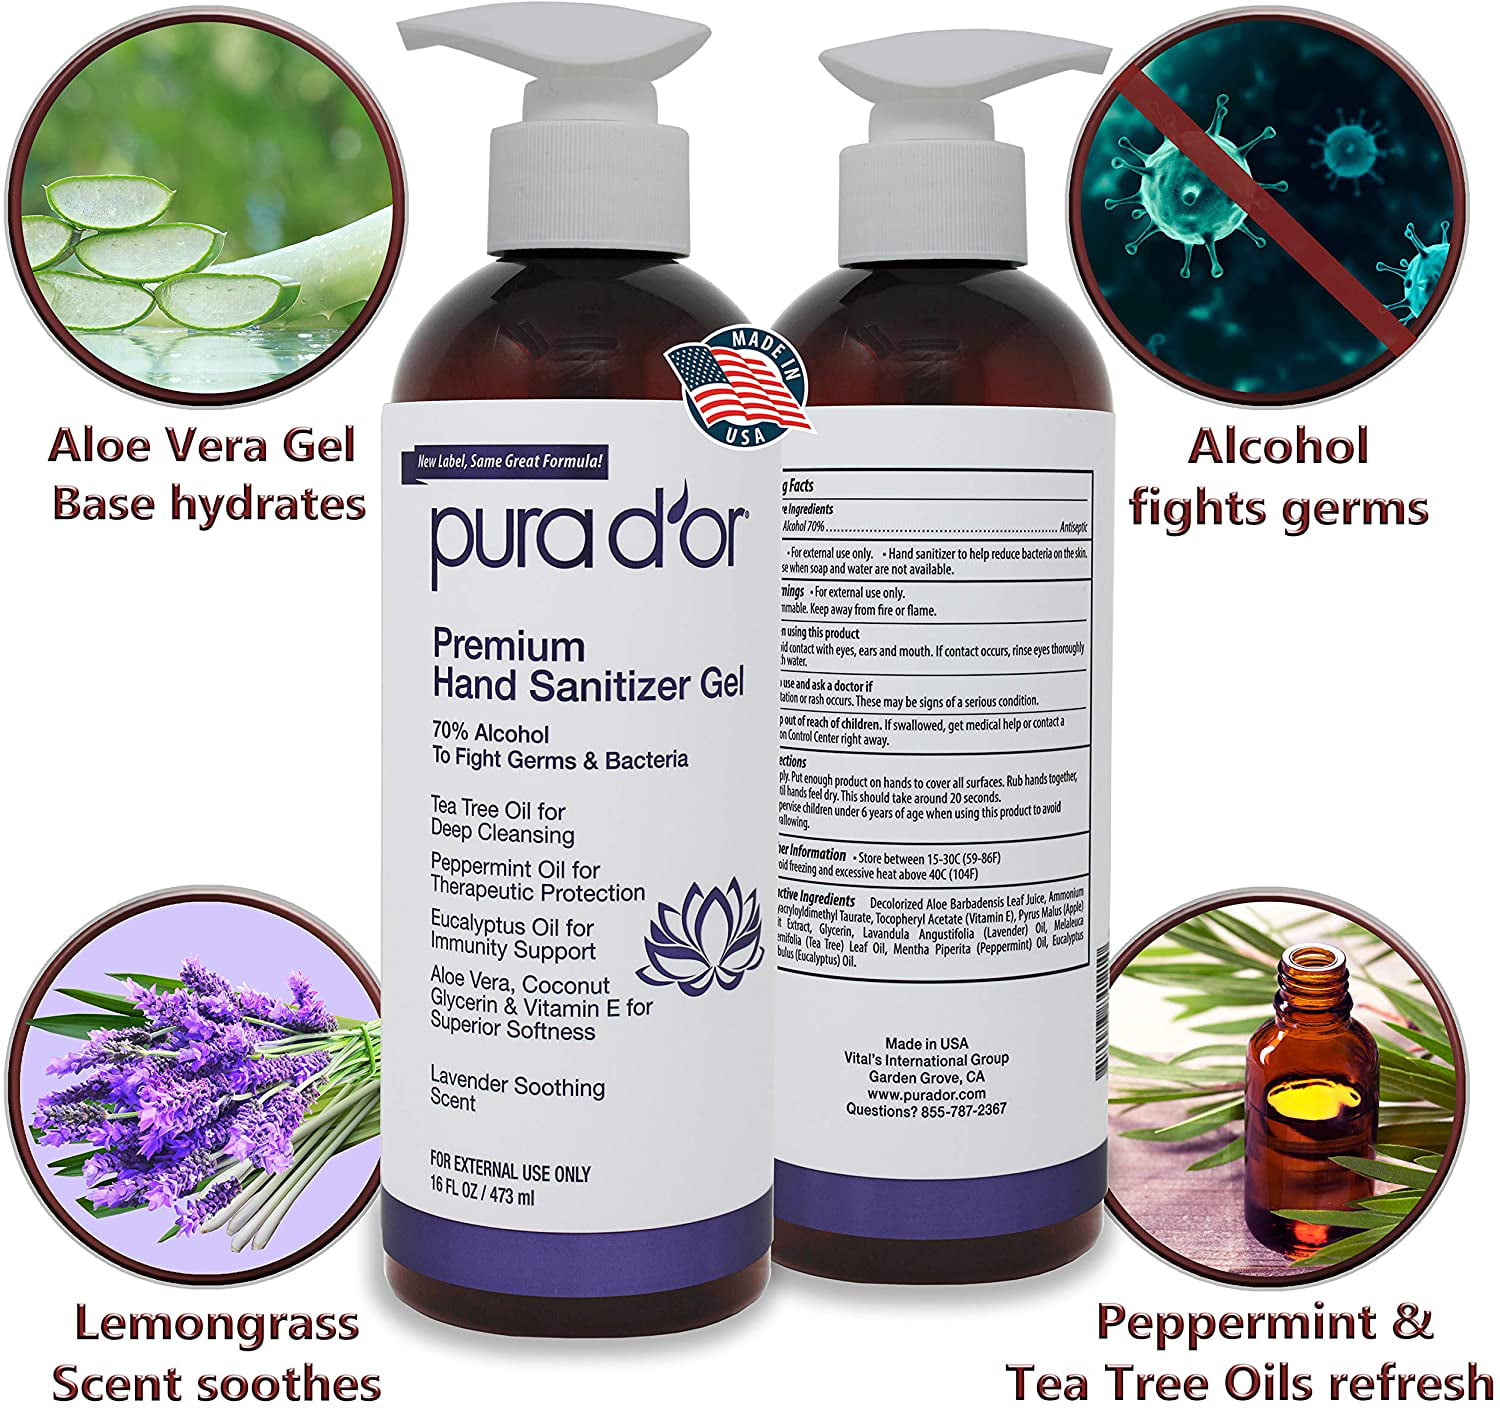 PURA D'OR Announces Availability of Five New Products